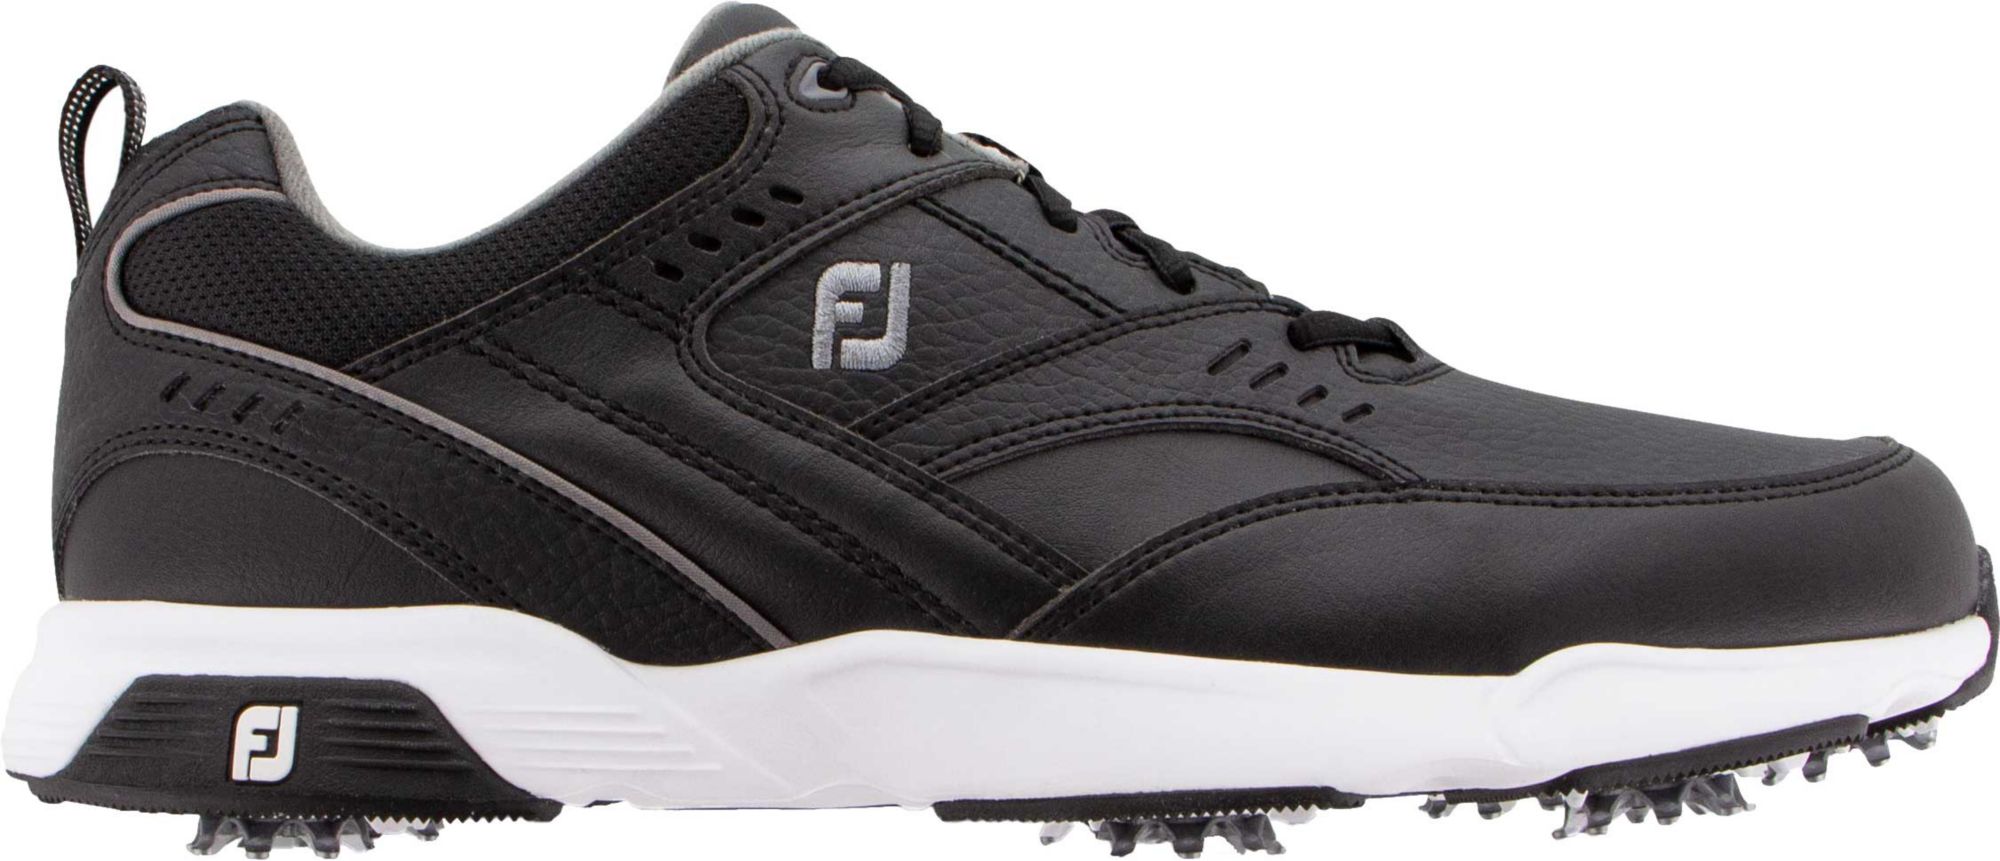 FootJoy Men's Specialty Golf Shoes - image 1 of 1